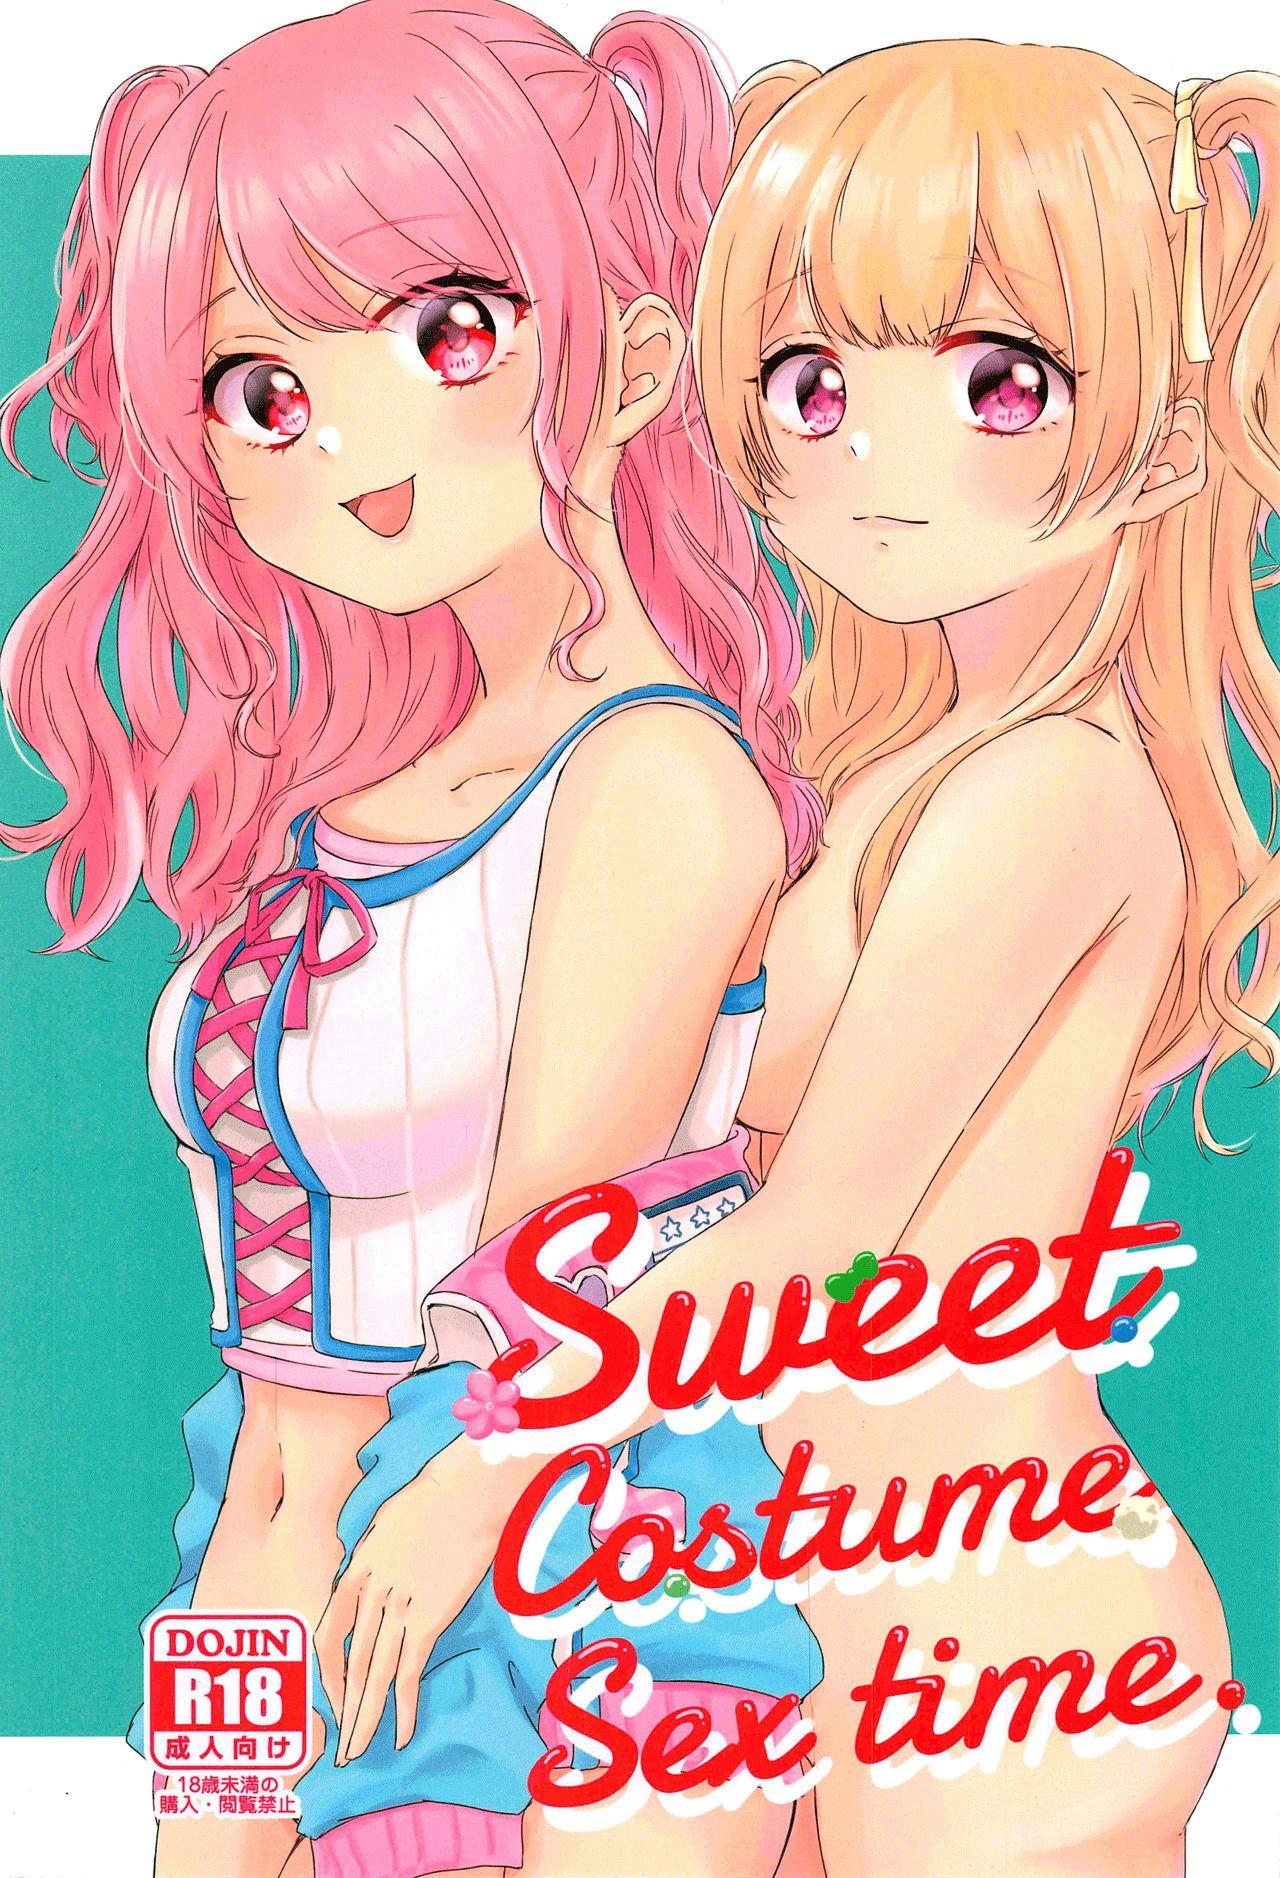 And Sweet Costume Sex time. - Bang dream Time - Page 2